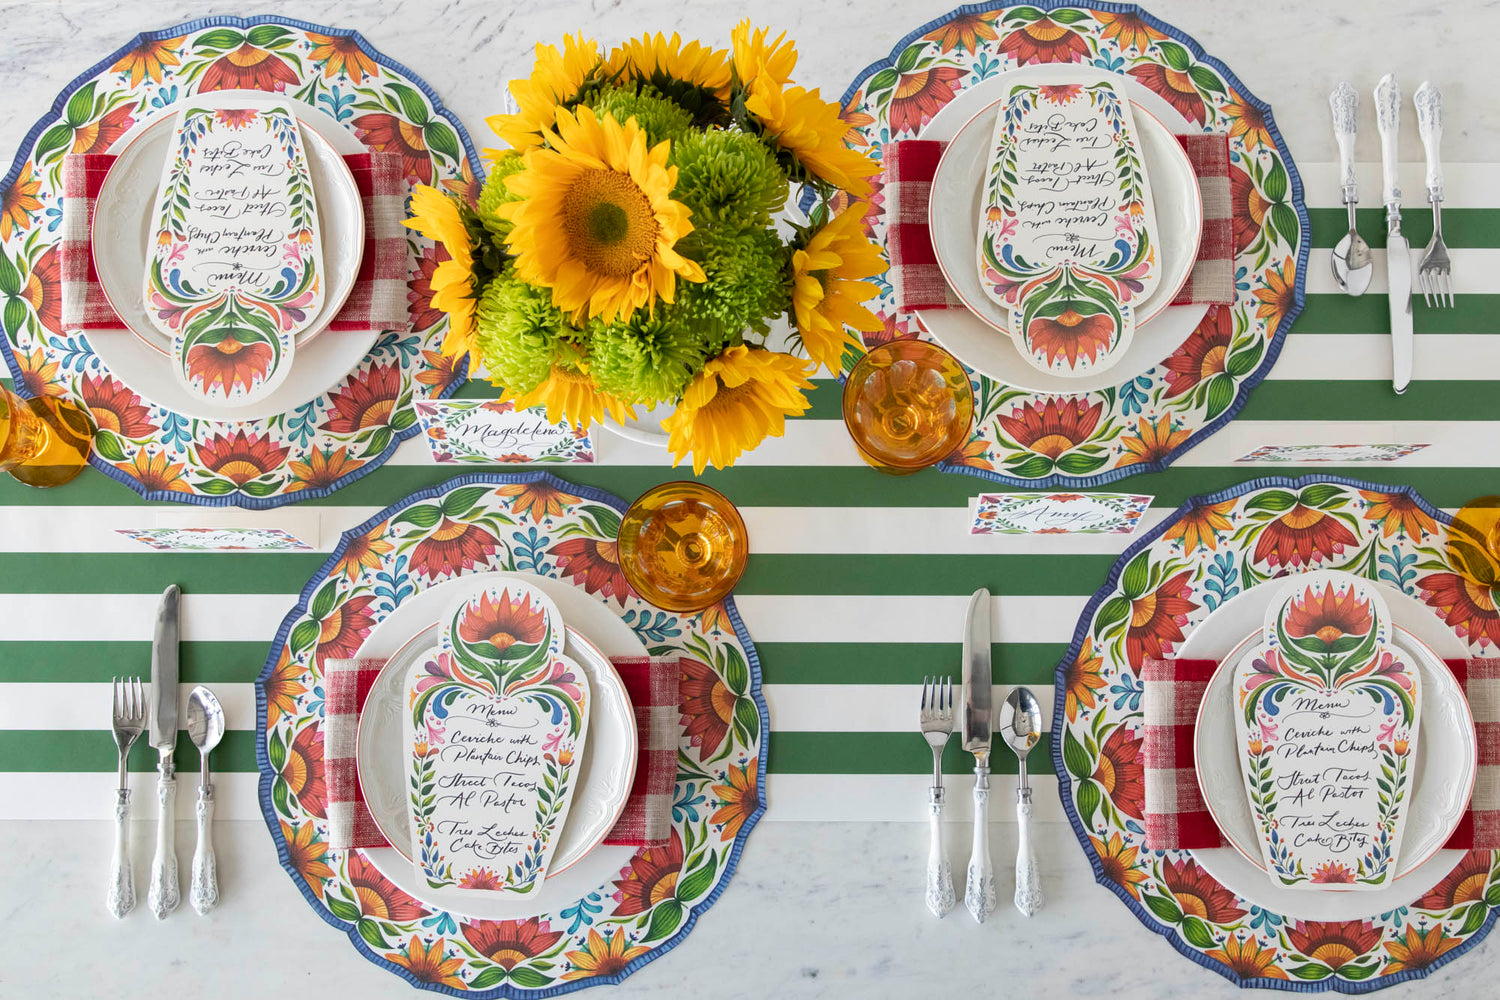 A colorful table setting for four with sunflowers, plates, and Die-cut Fiesta Floral Placemats from Hester &amp; Cook, from above.